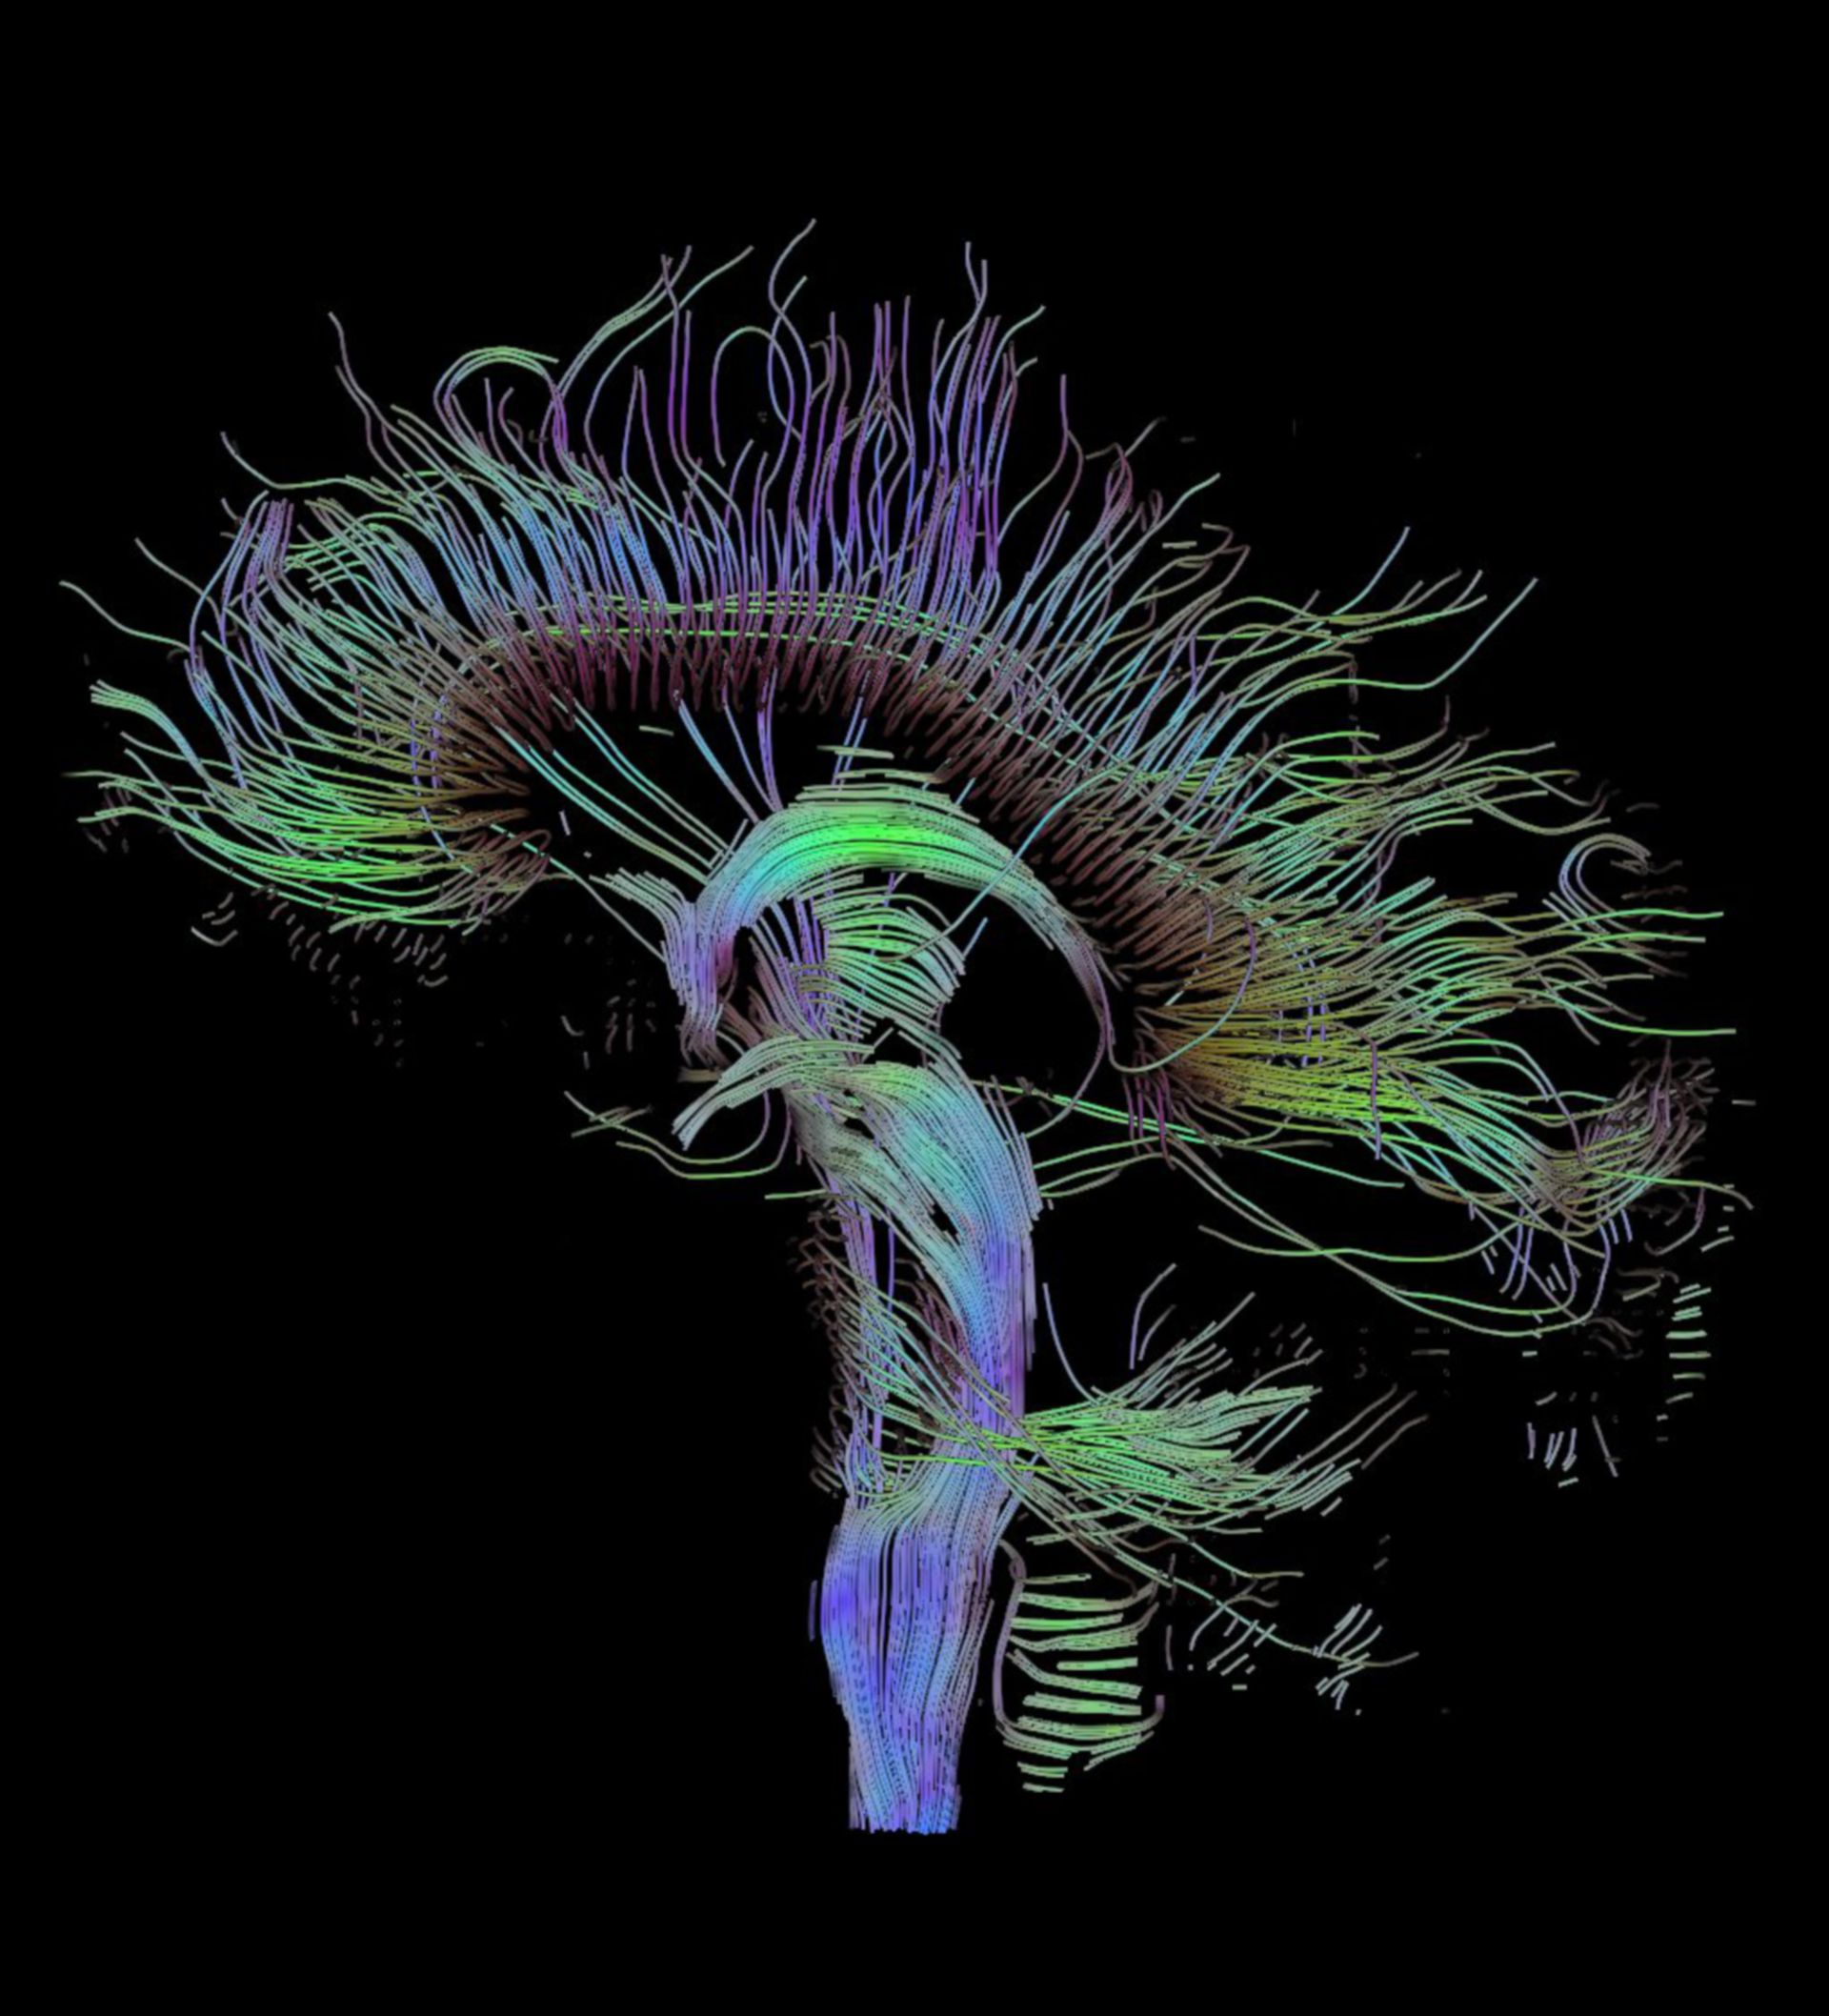 Tractographic reconstruction of neural connections via DTI